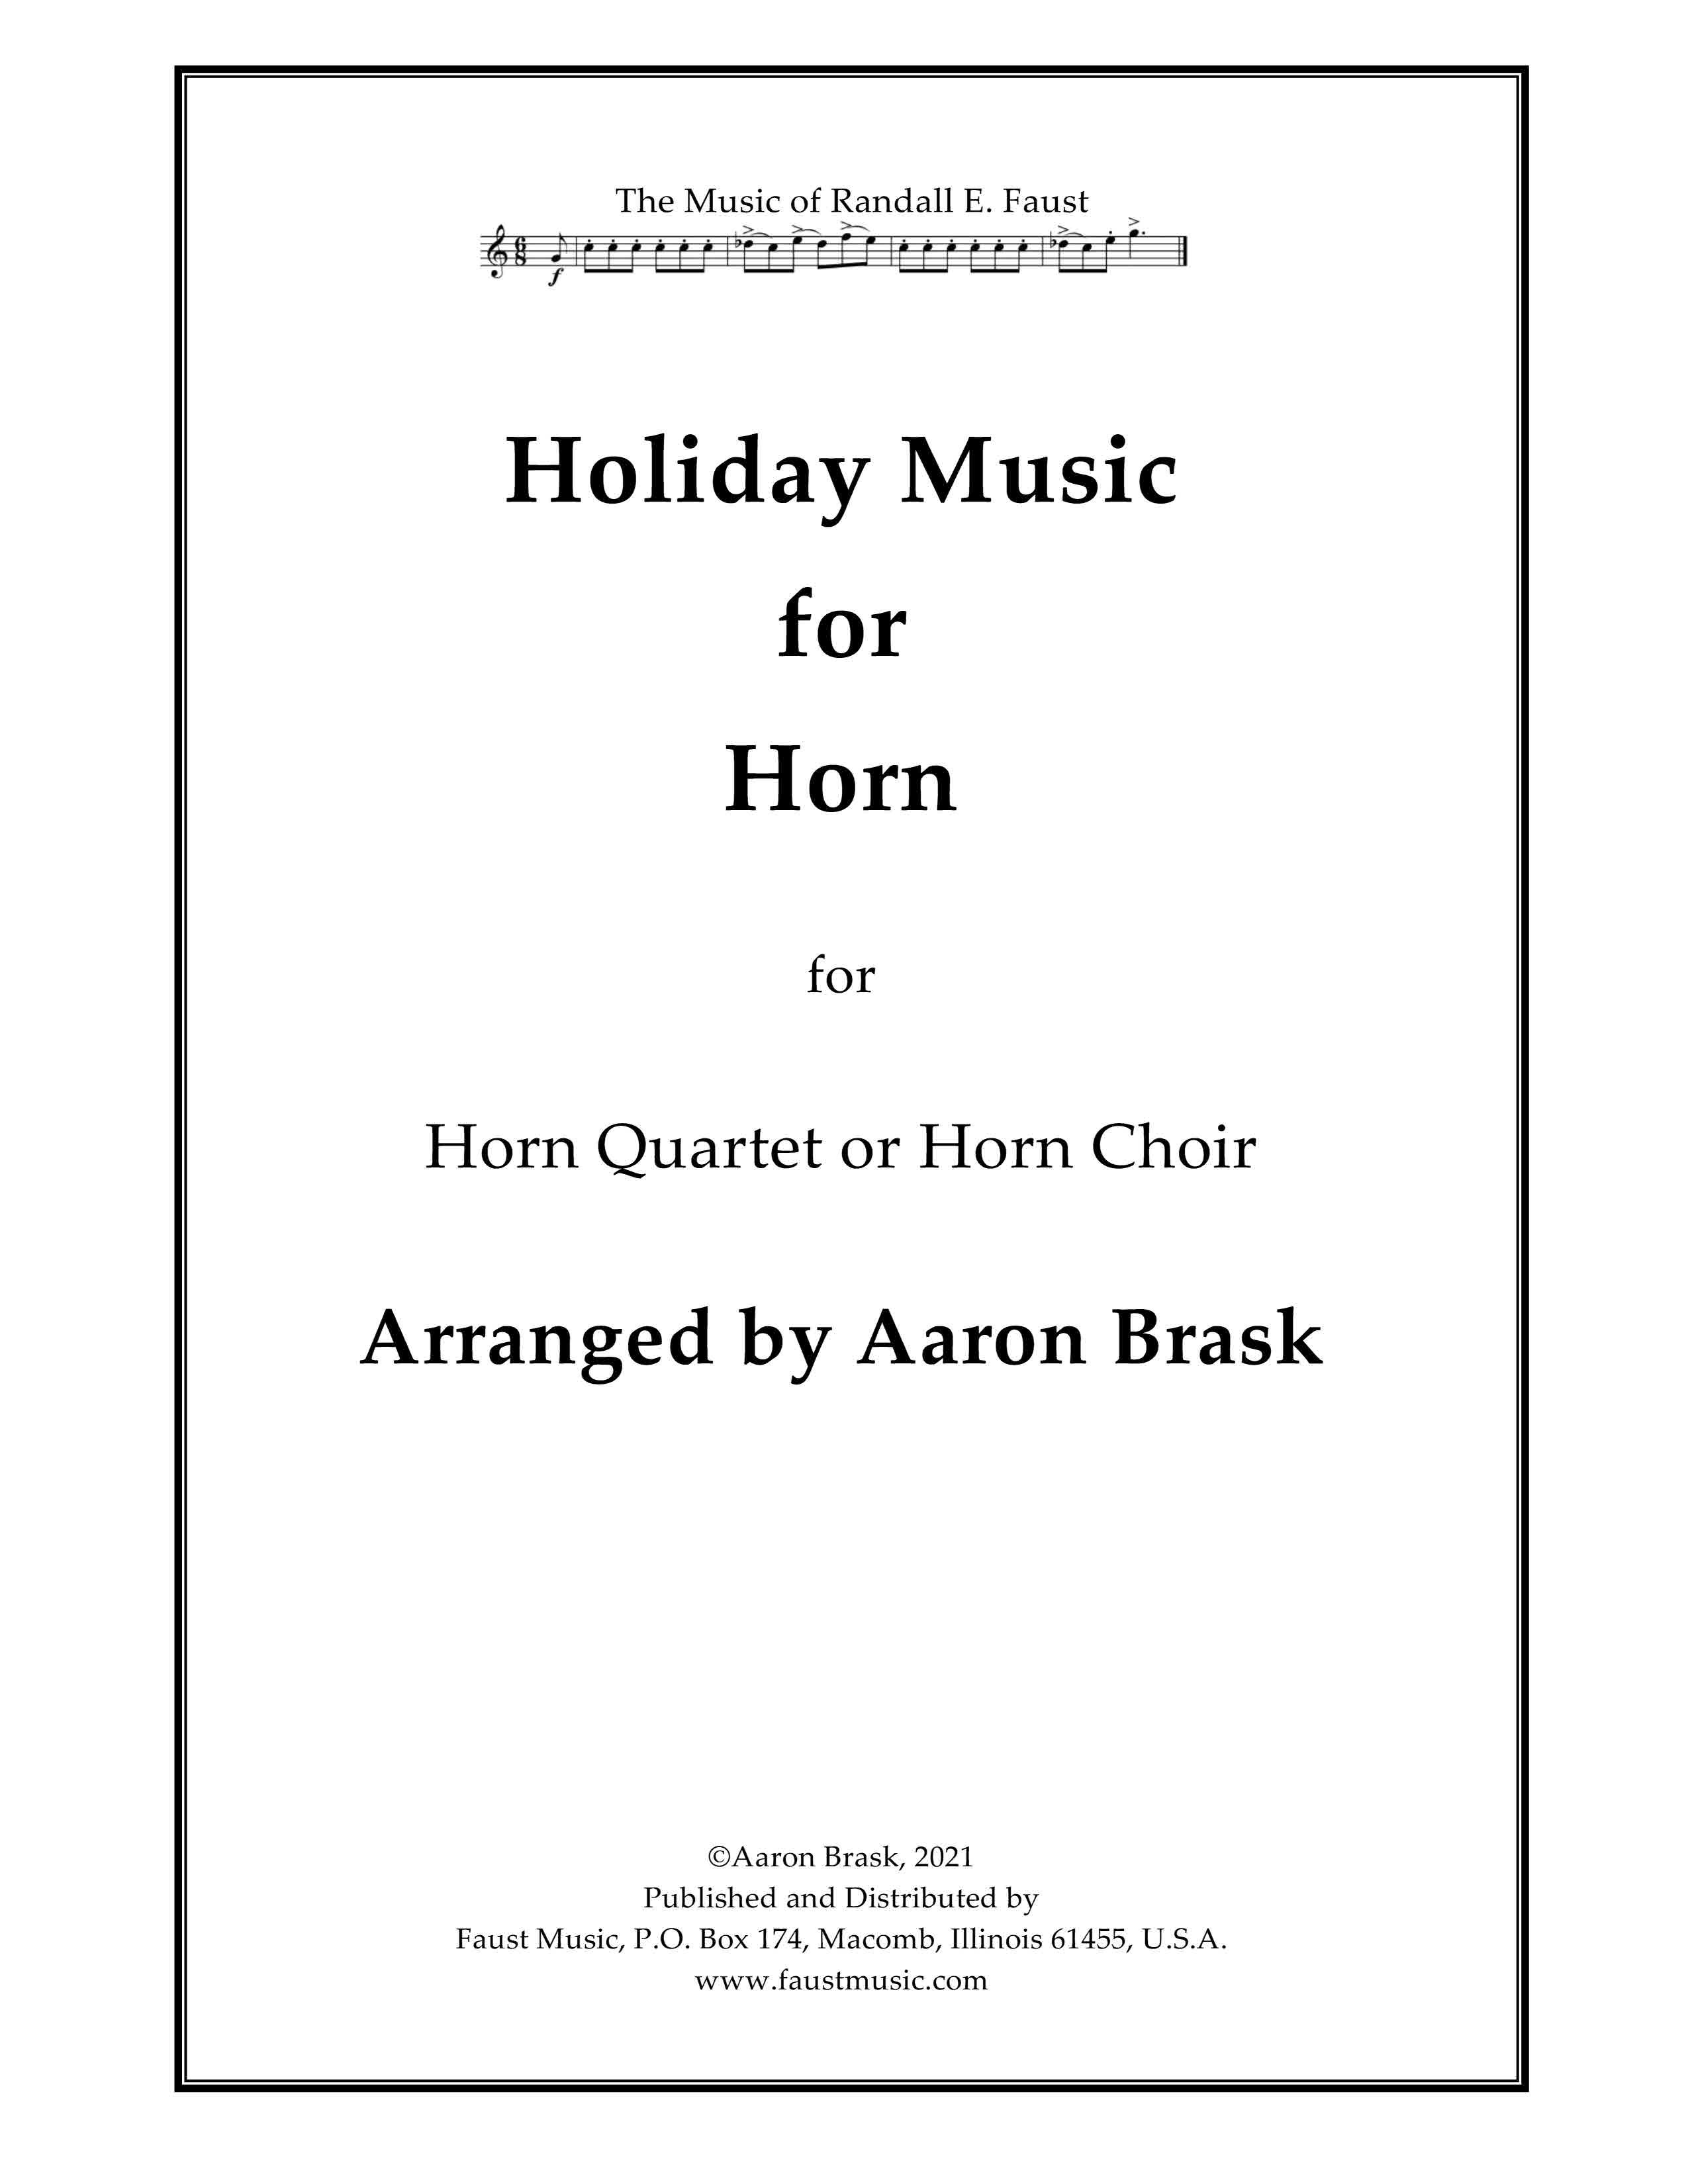 Holiday Music for Horn Quartet or Choir arranged by Aaron Brask (2021)